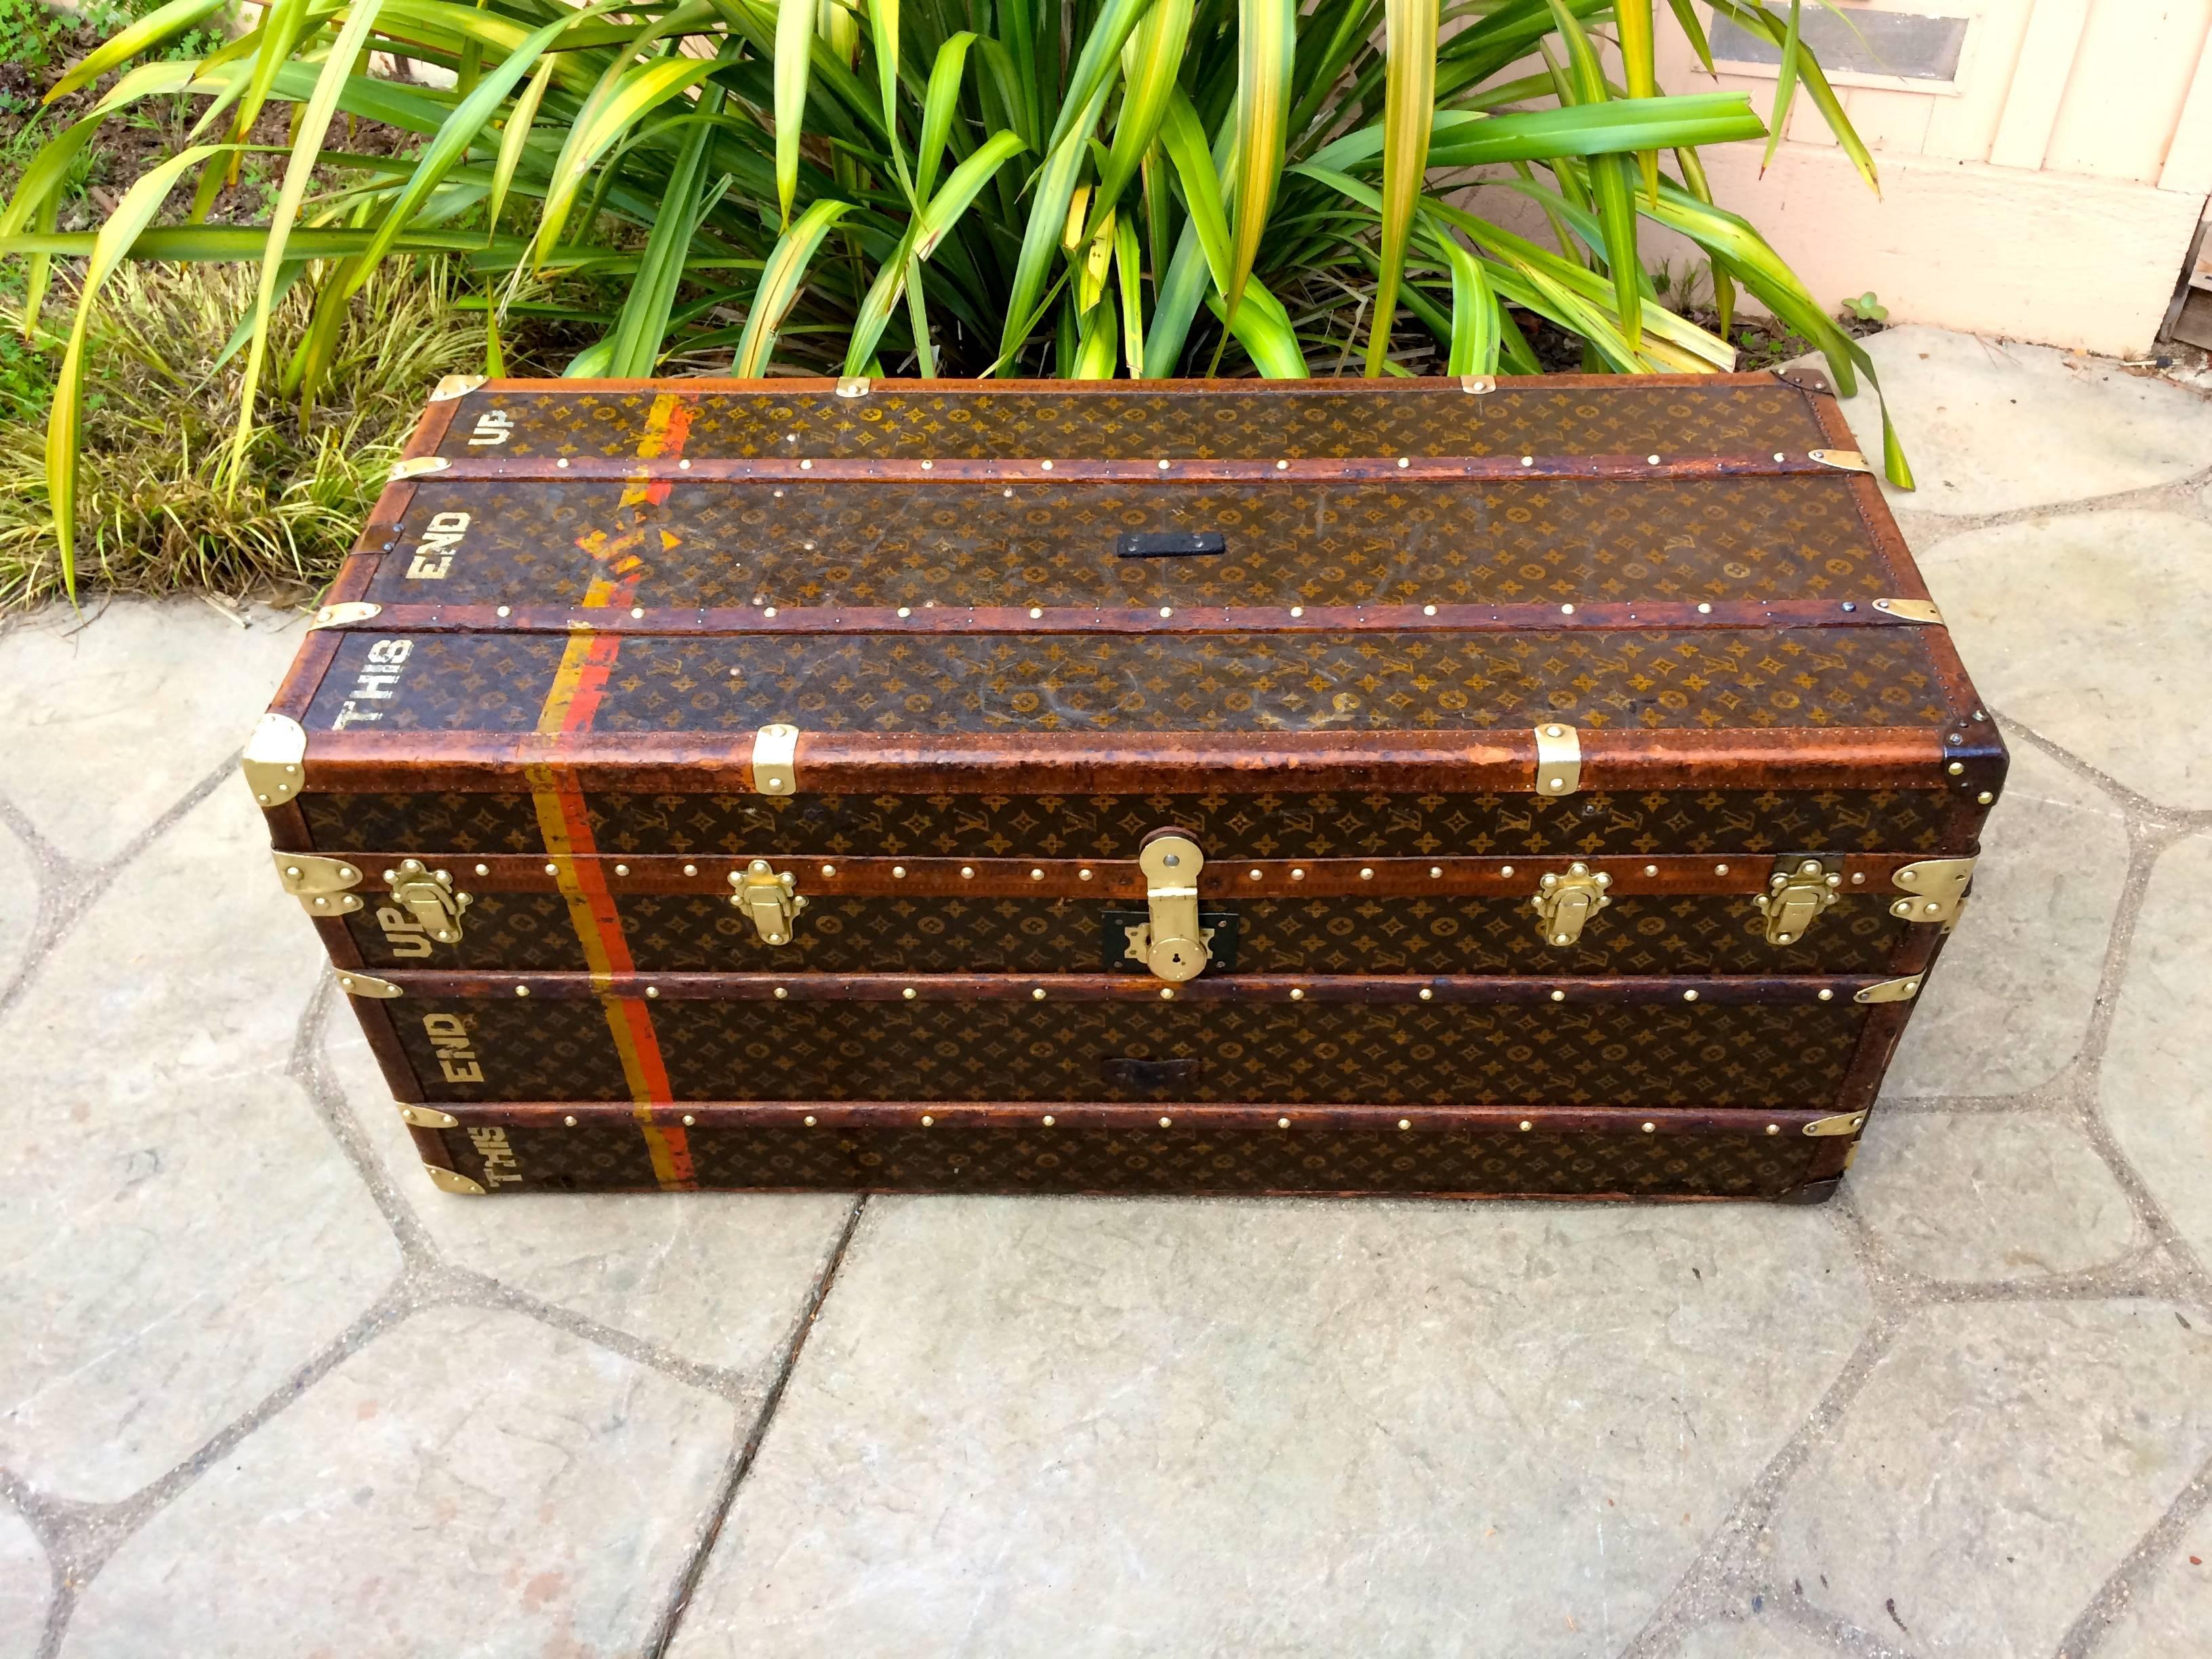 Magnificent extra large antique Louis Vuitton steamer trunk. This trunk measures in inches 22 x 23 x 52.